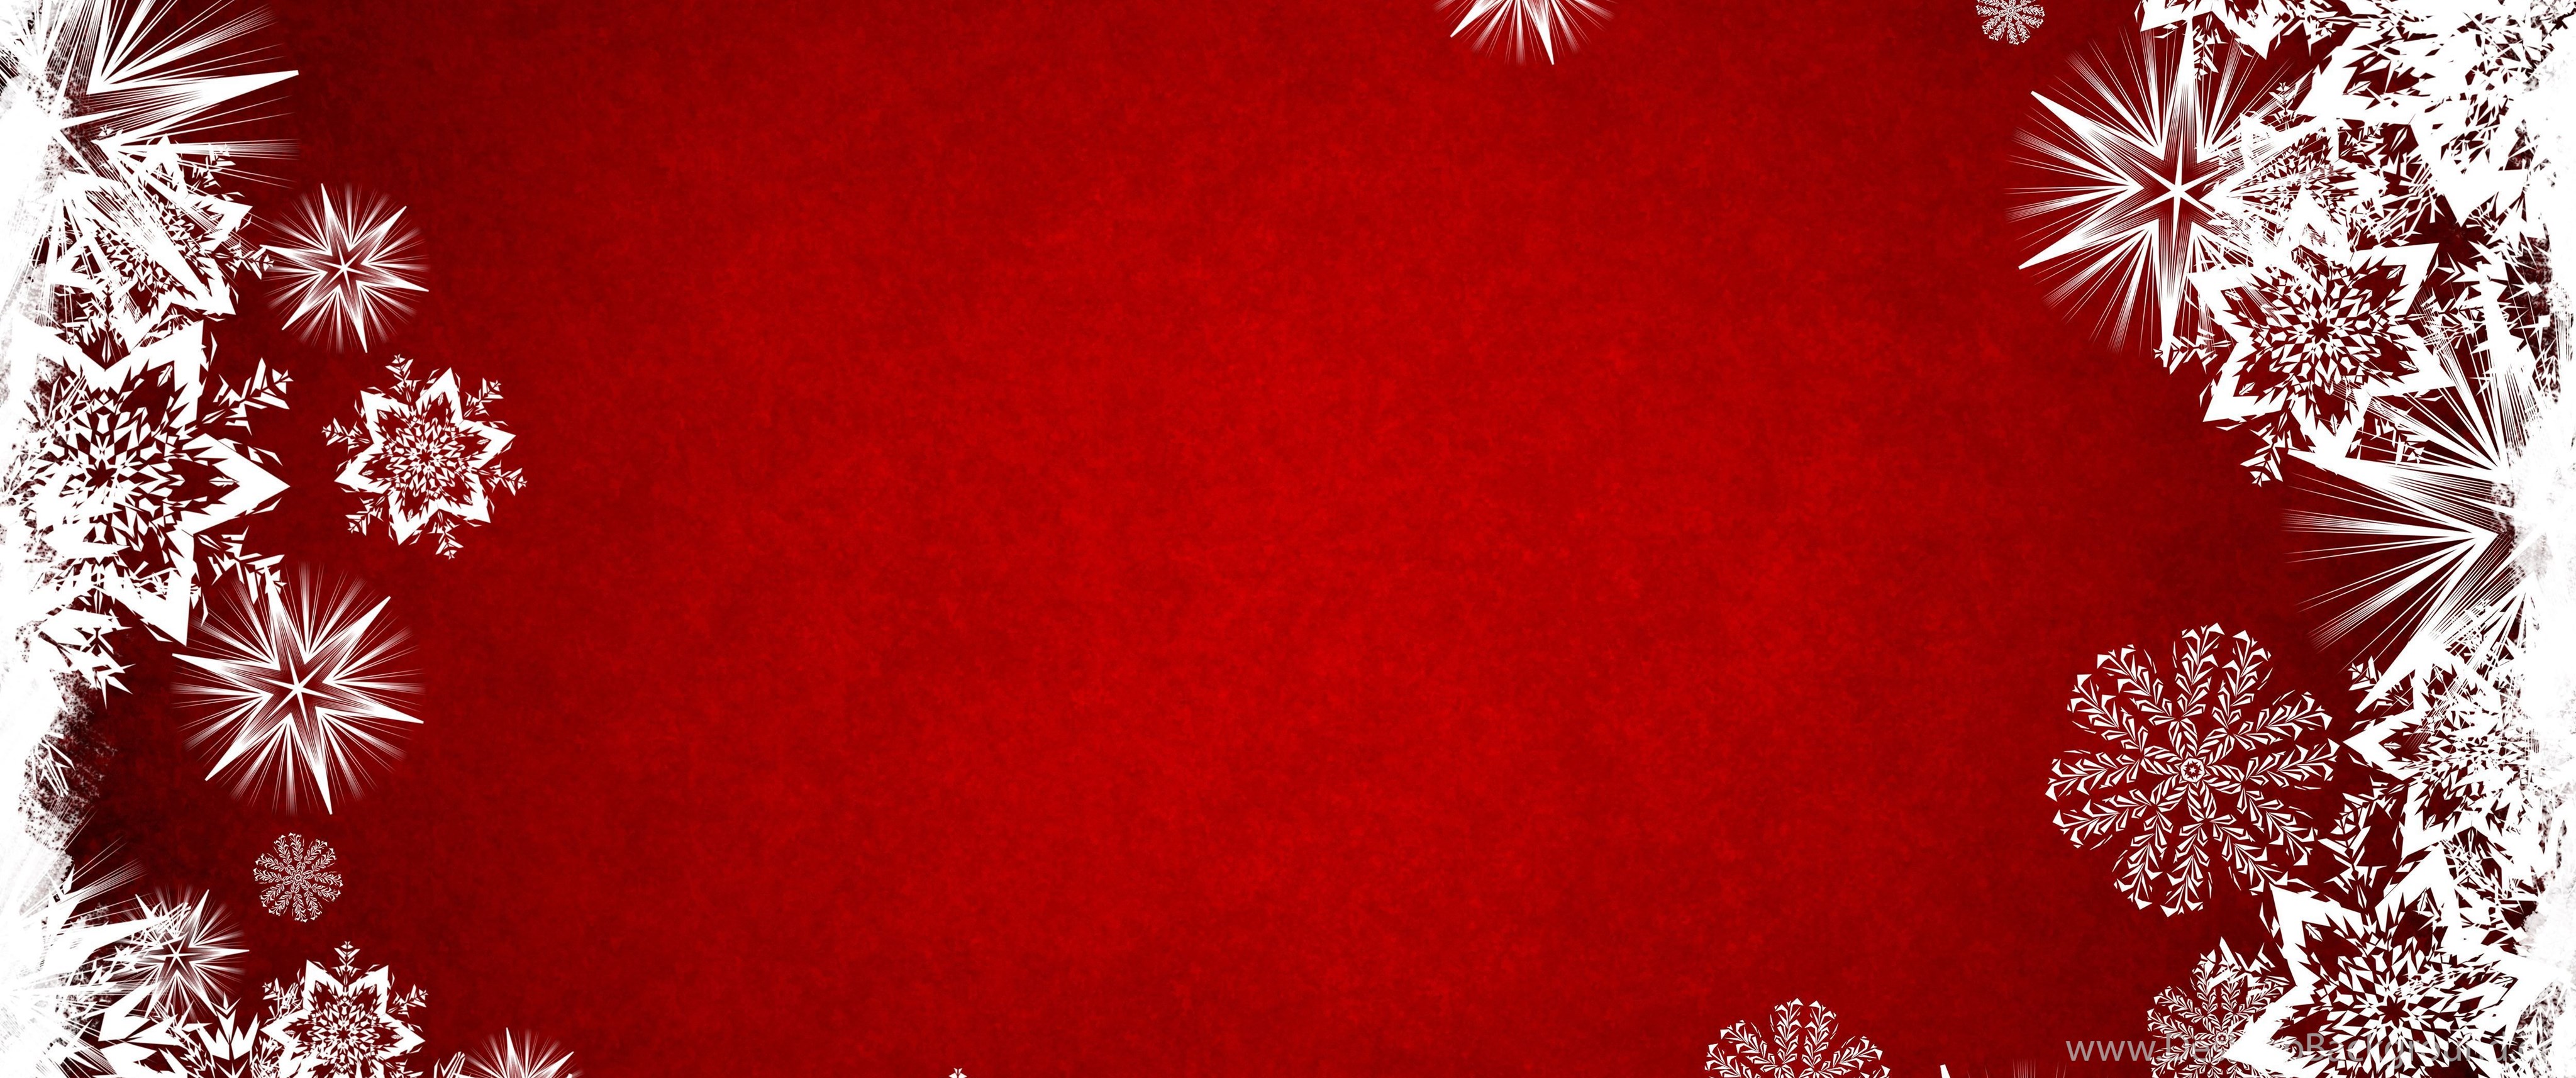 Red And White Christmas Wallpapers Desktop Backgrounds